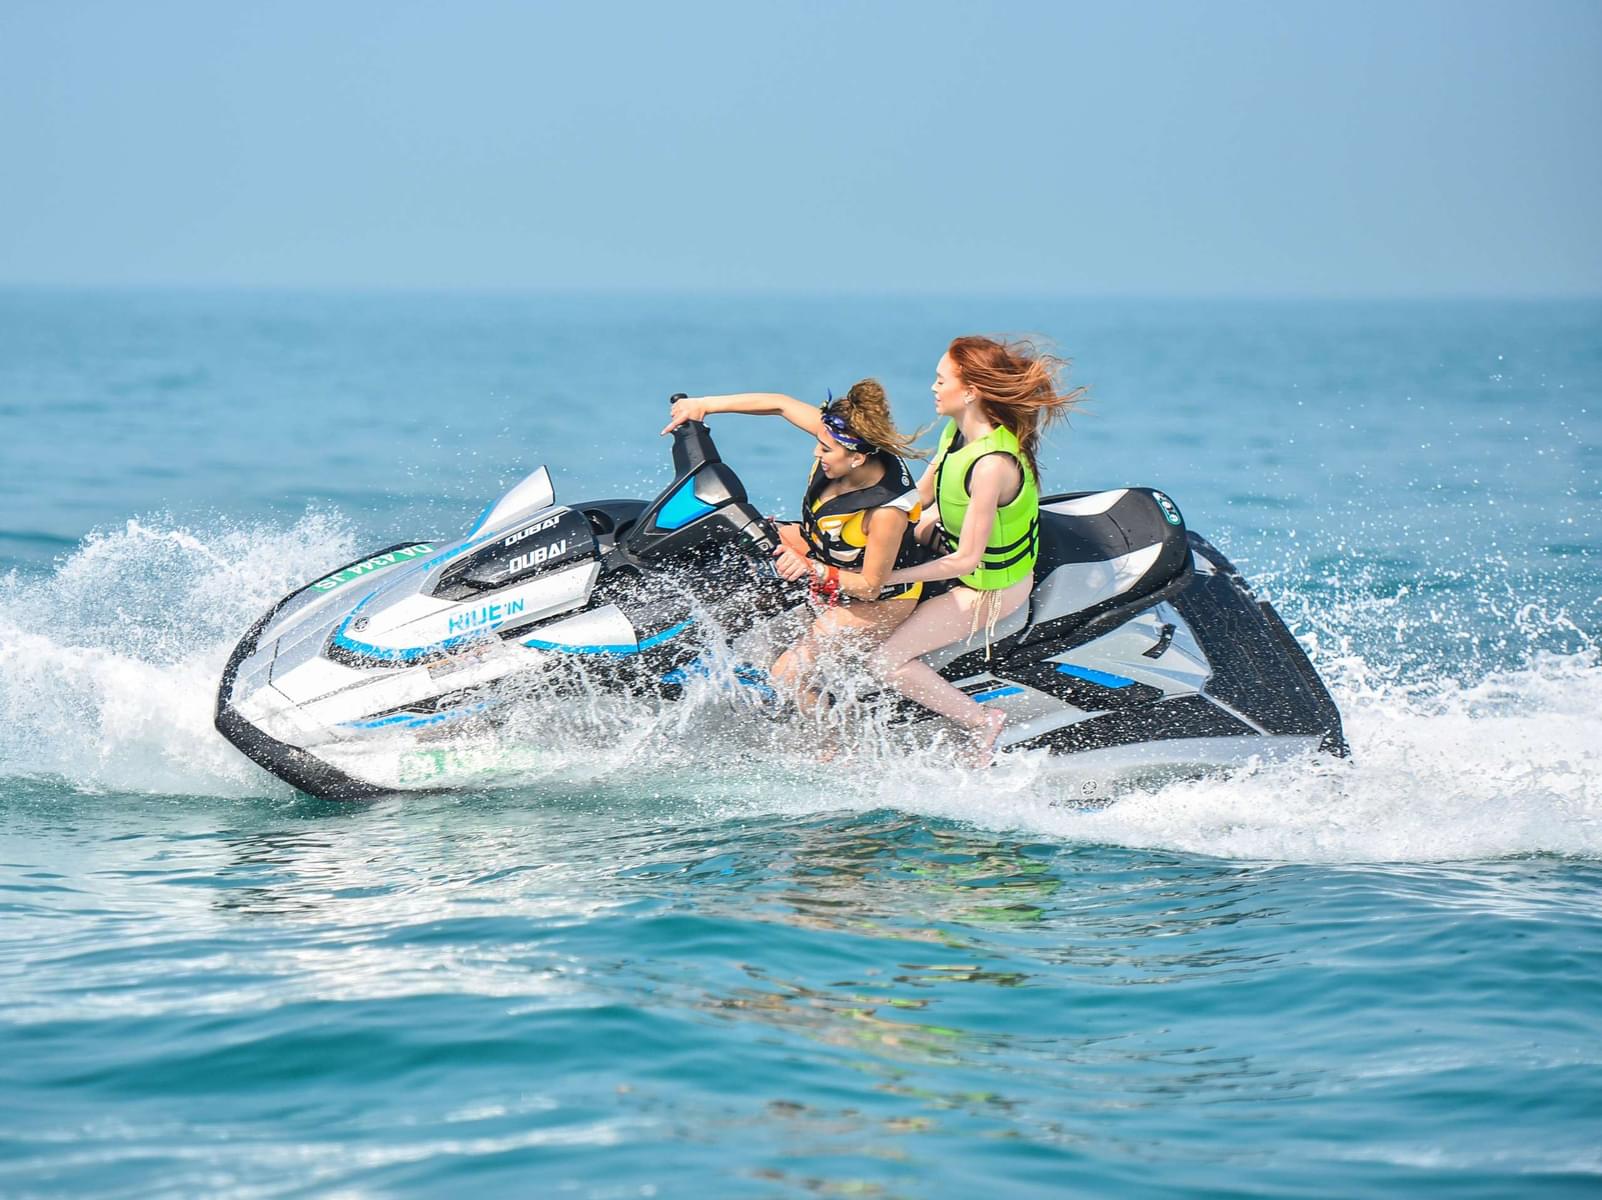 Experience the thrill of a lifetime as you speed across the crystal clear waters of Abu Dhabi